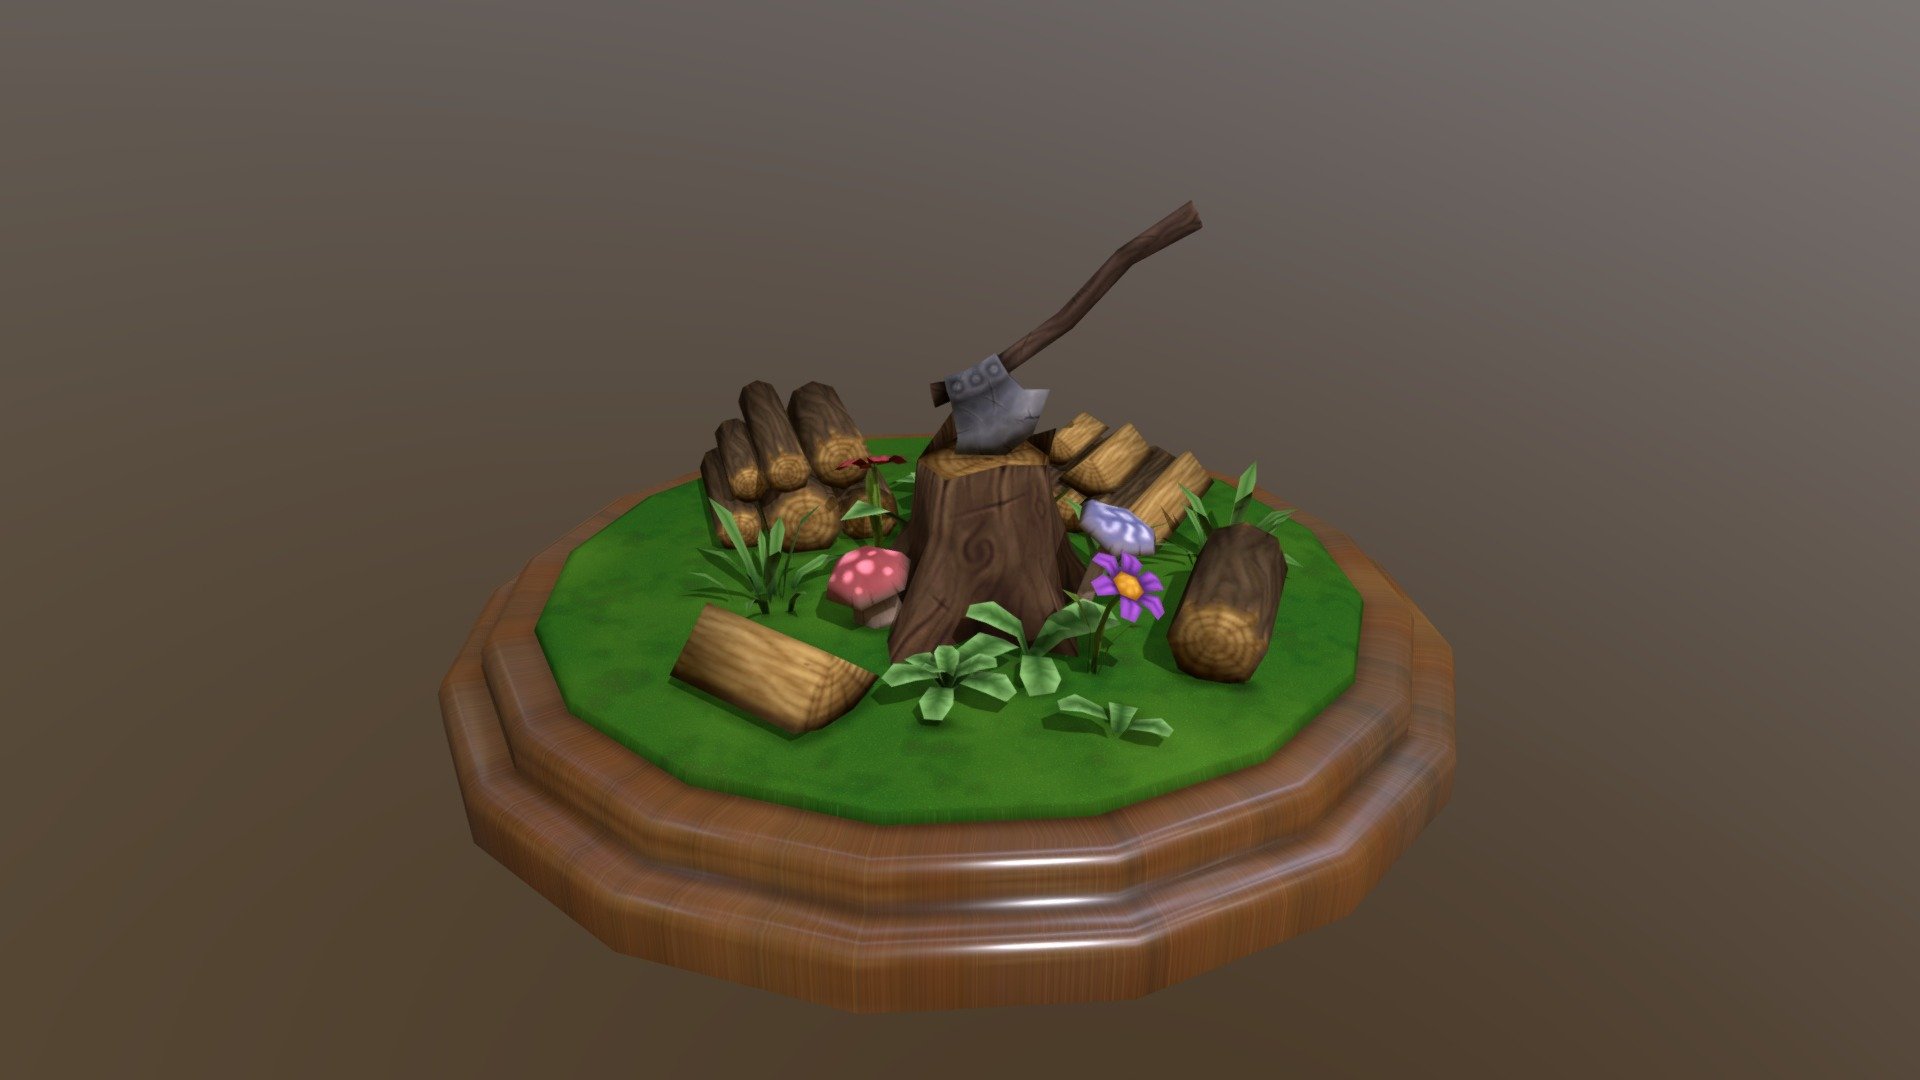 A small logging diorama I have created as part of a bigger, low poly, hand painted forest asset bundle.

Every asset has been painted by hand and every asset has it's own texture.

The low poly count makes the assets ideal for PC or mobile game.

For example:




Stump - verts: 66, tris: 104 - using a 256x256 texture.

Axe - verts: 72, tris: 140 - using a 256x256 texture.

Flower - verts: 80, tris: 57 - using a 64x64 texture.

Log -  verts: 18, tris: 32 - using 128x128 texture.

(The forest asset bundle is using two 2048x2048 texture atlases for 185 assets in total.) - Logging diorama - low poly, hand painted - 3D model by Keyron91 3d model